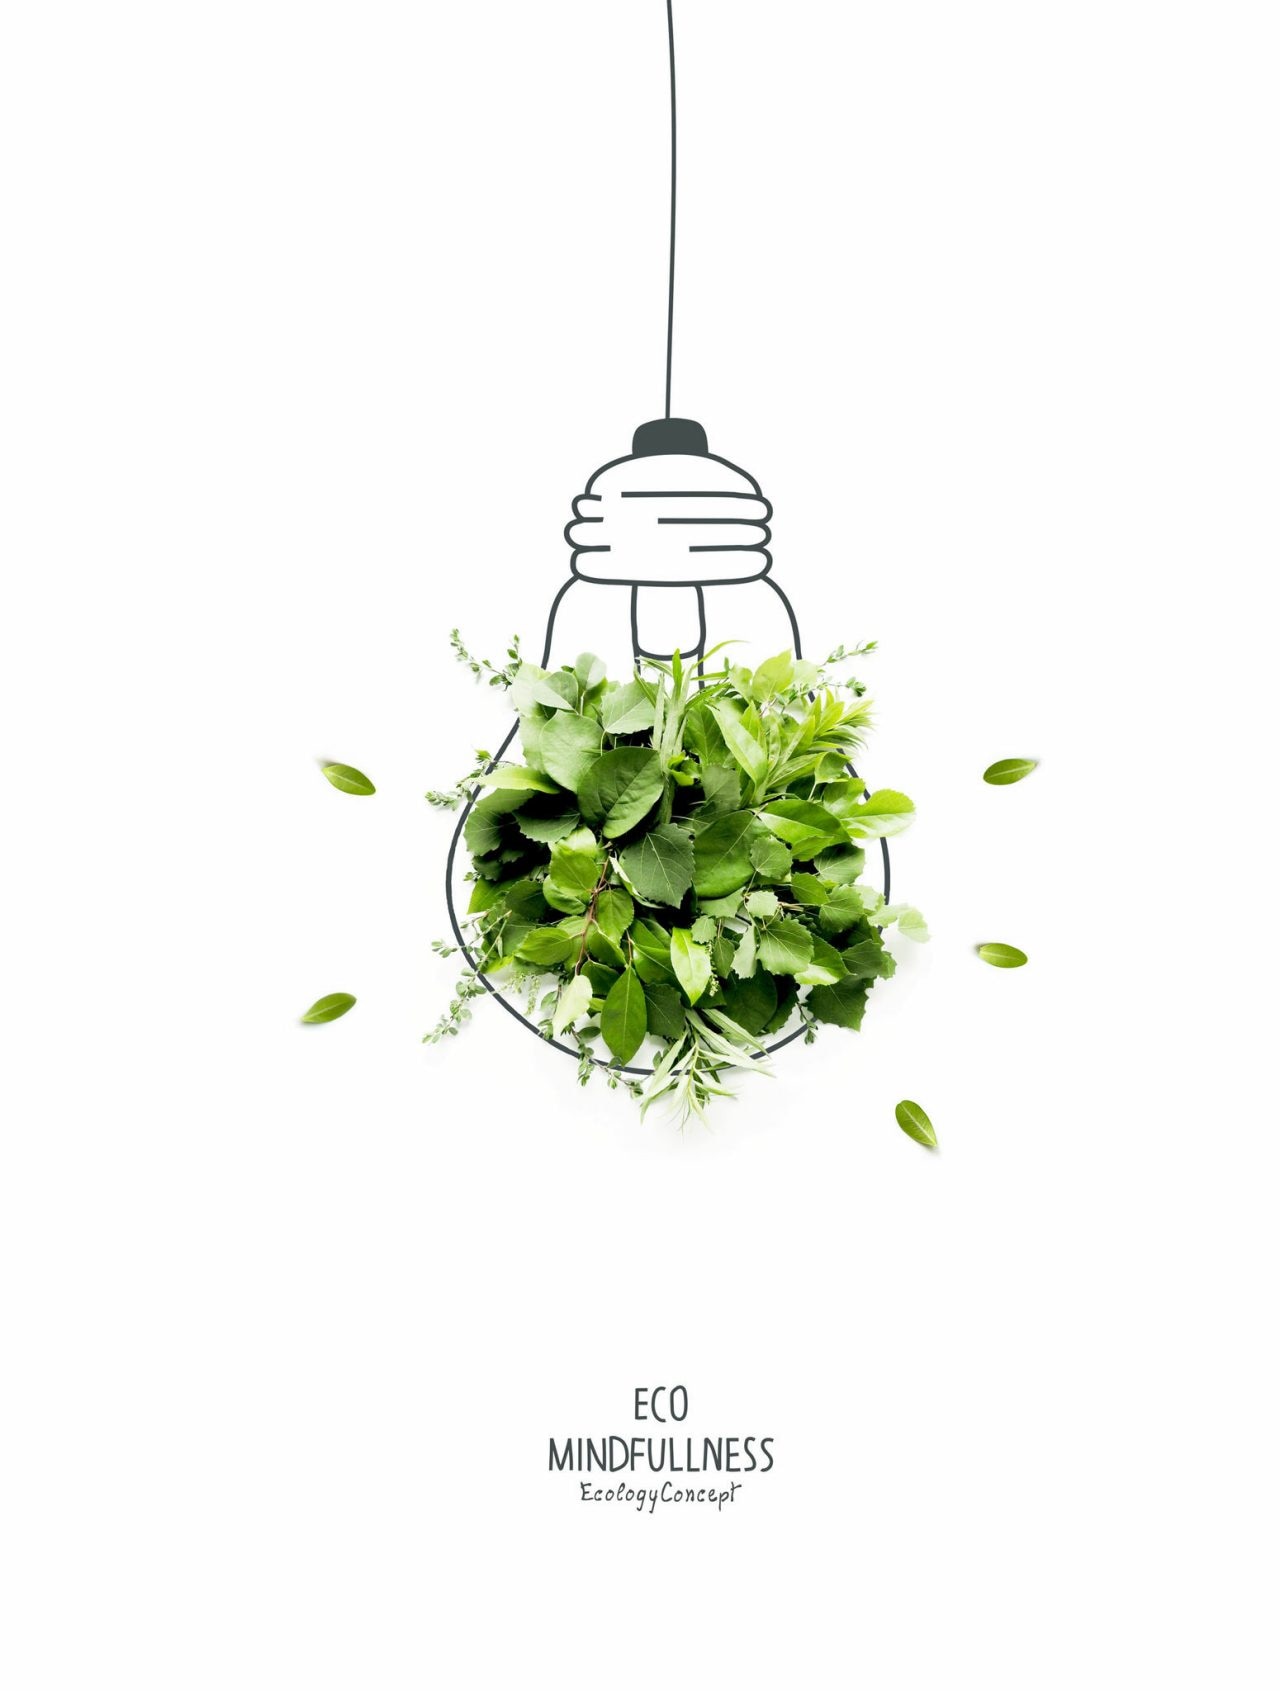 Energy saving eco lamp, made with green sprout and leaves,isolated on white background. LED lamp with green leaf. Minimal nature concept.Think Green.Ecology Concept. Environmentally friendly planet., Energy saving eco lamp, made with green sprout and leaves,isolat